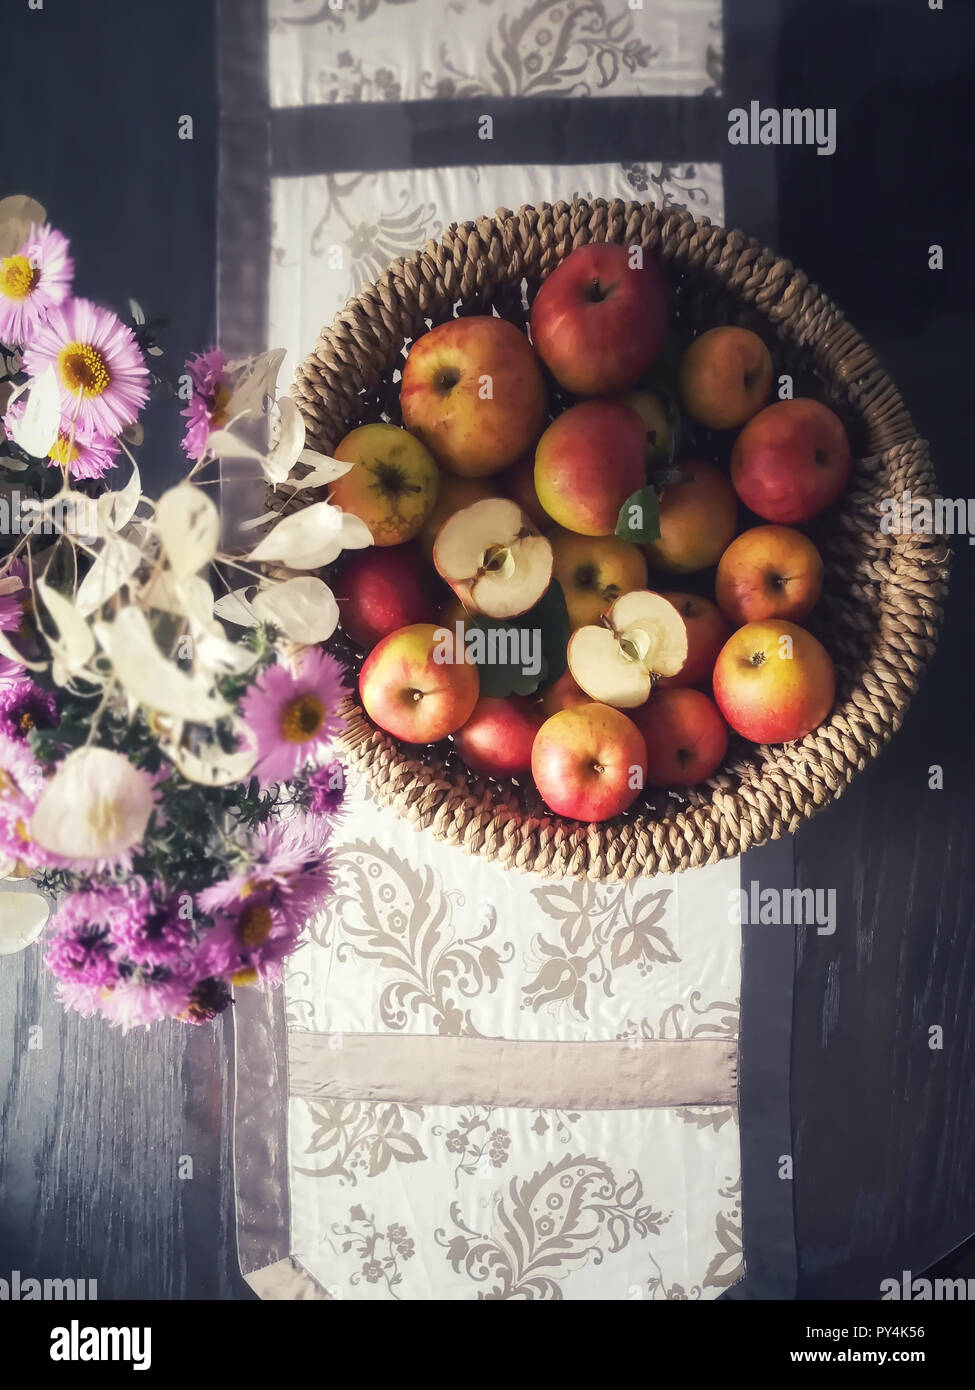 Organic apples are in a basket. 'Asters' and 'lunarias' are autumn flowers. Seasonal elements photographed from above. Stock Photo